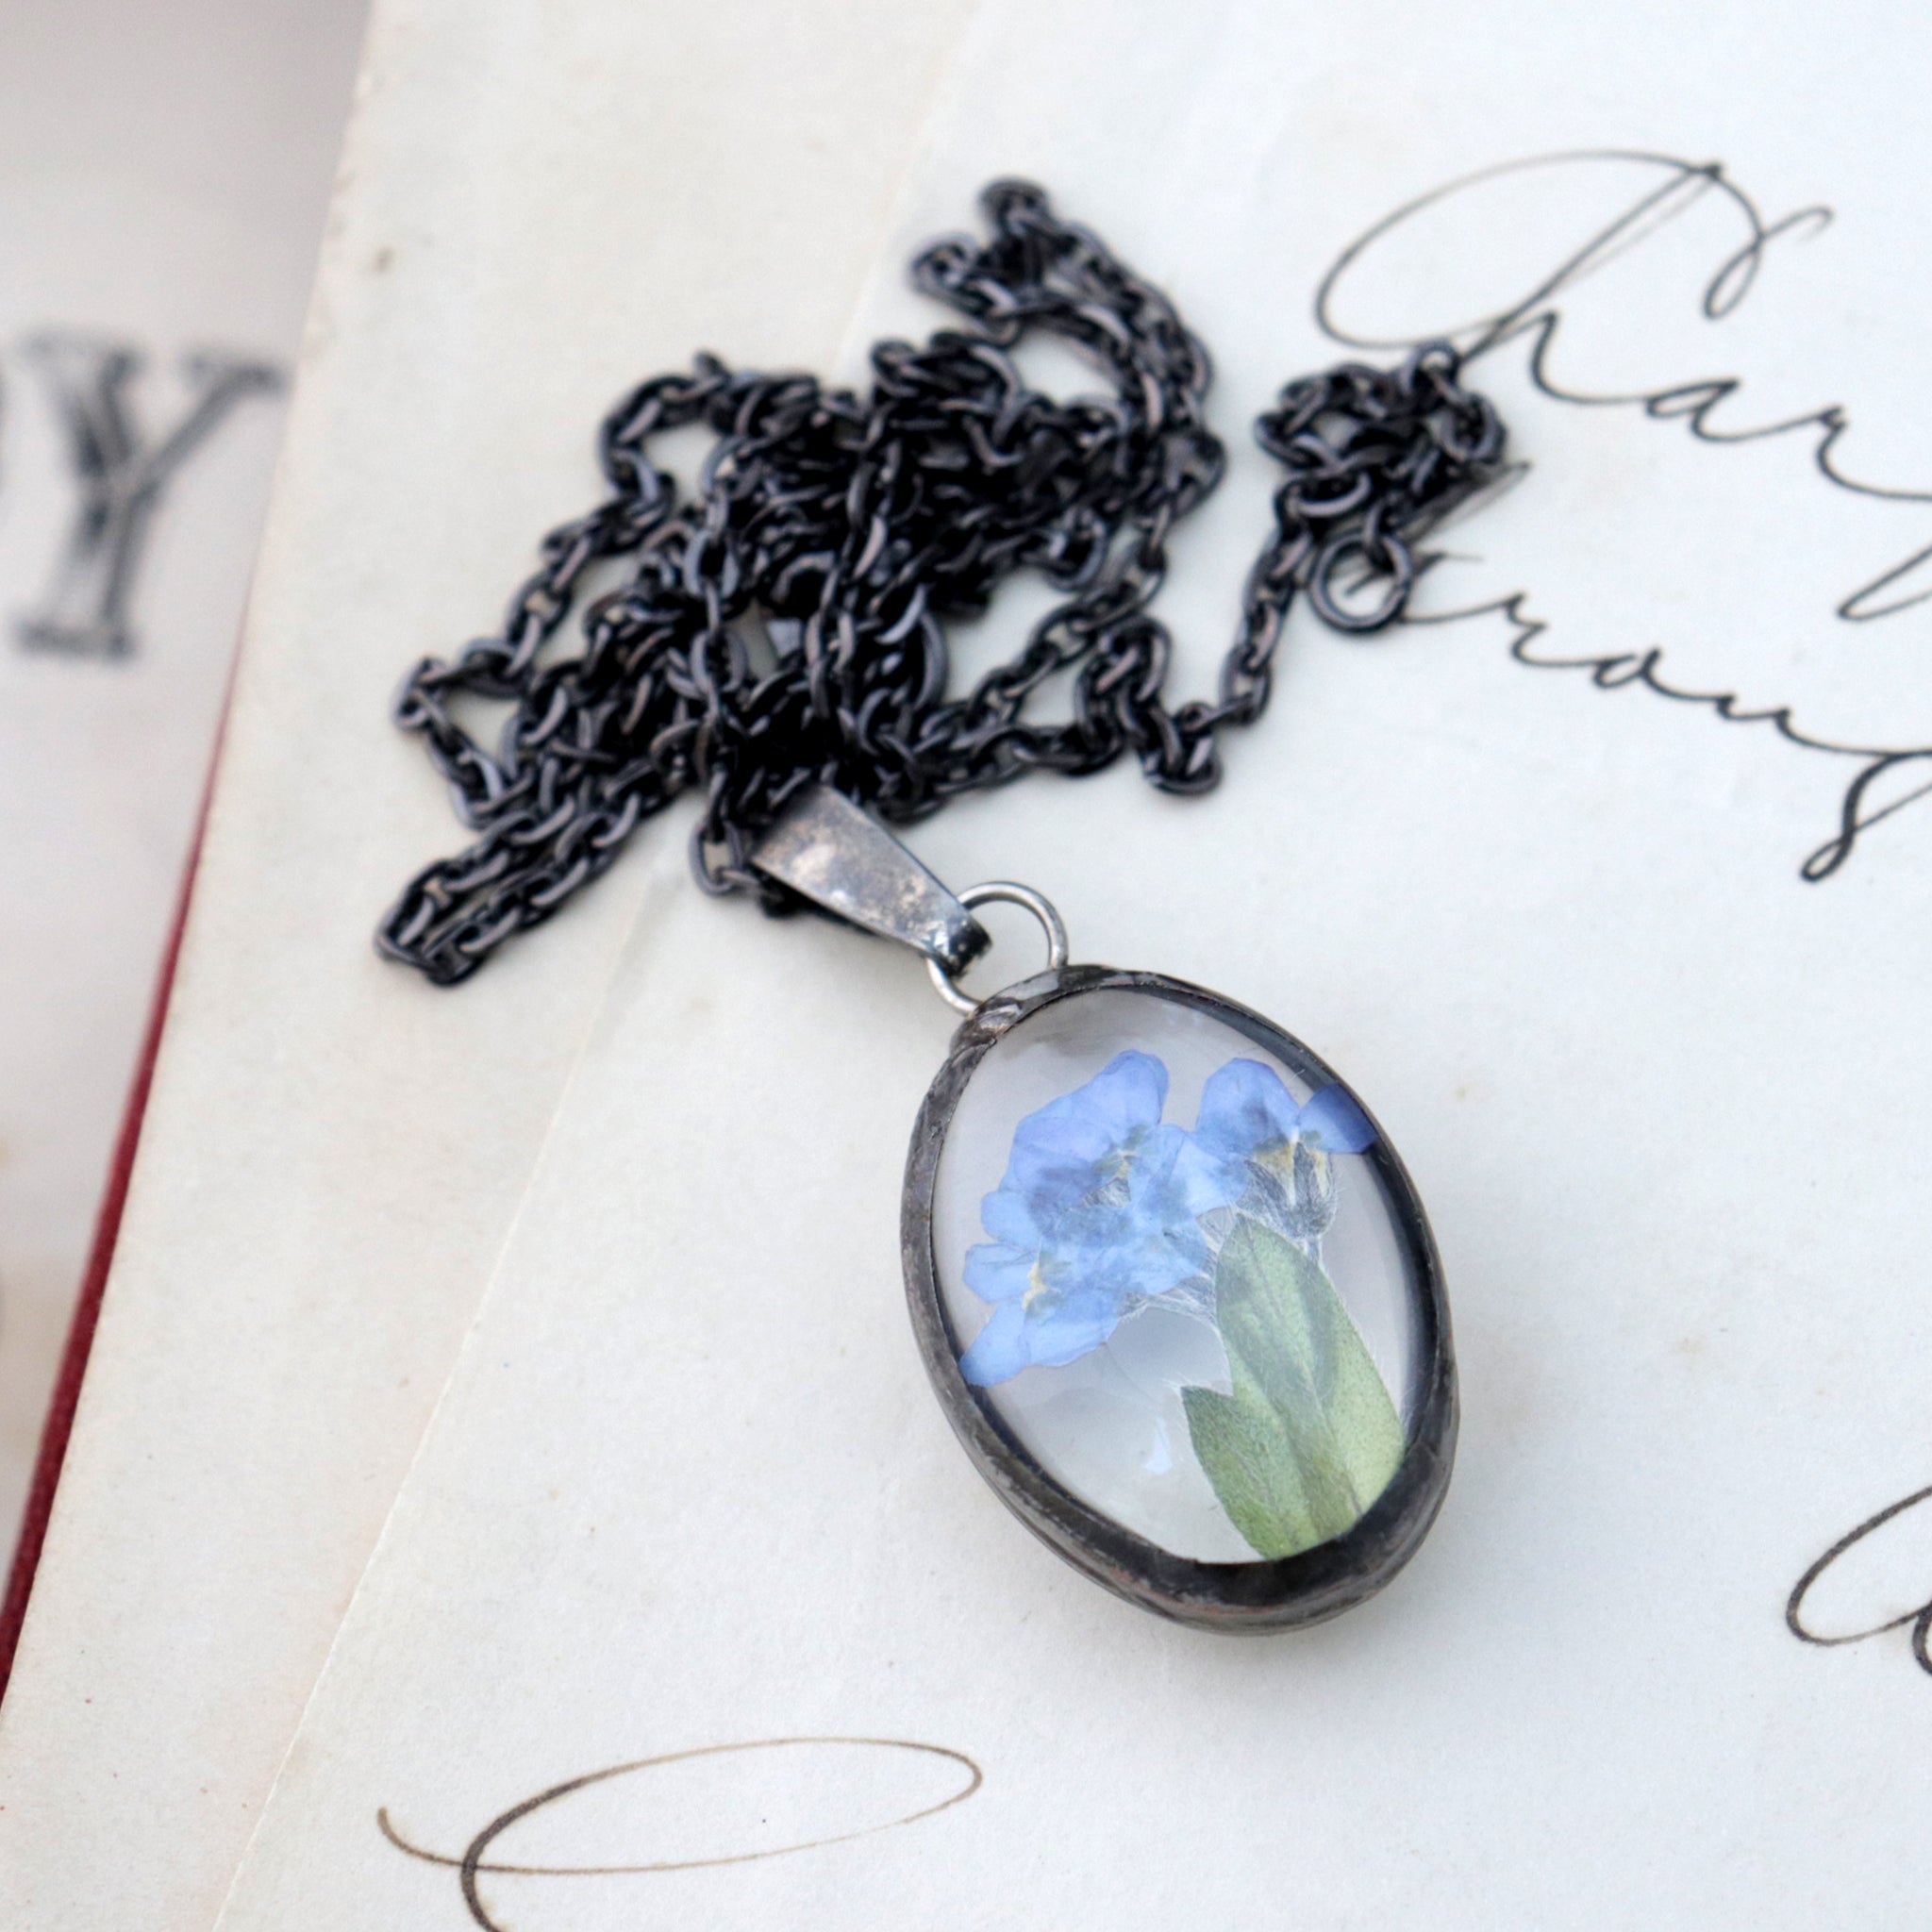 Forget-me-not oval little necklace lying on an old book